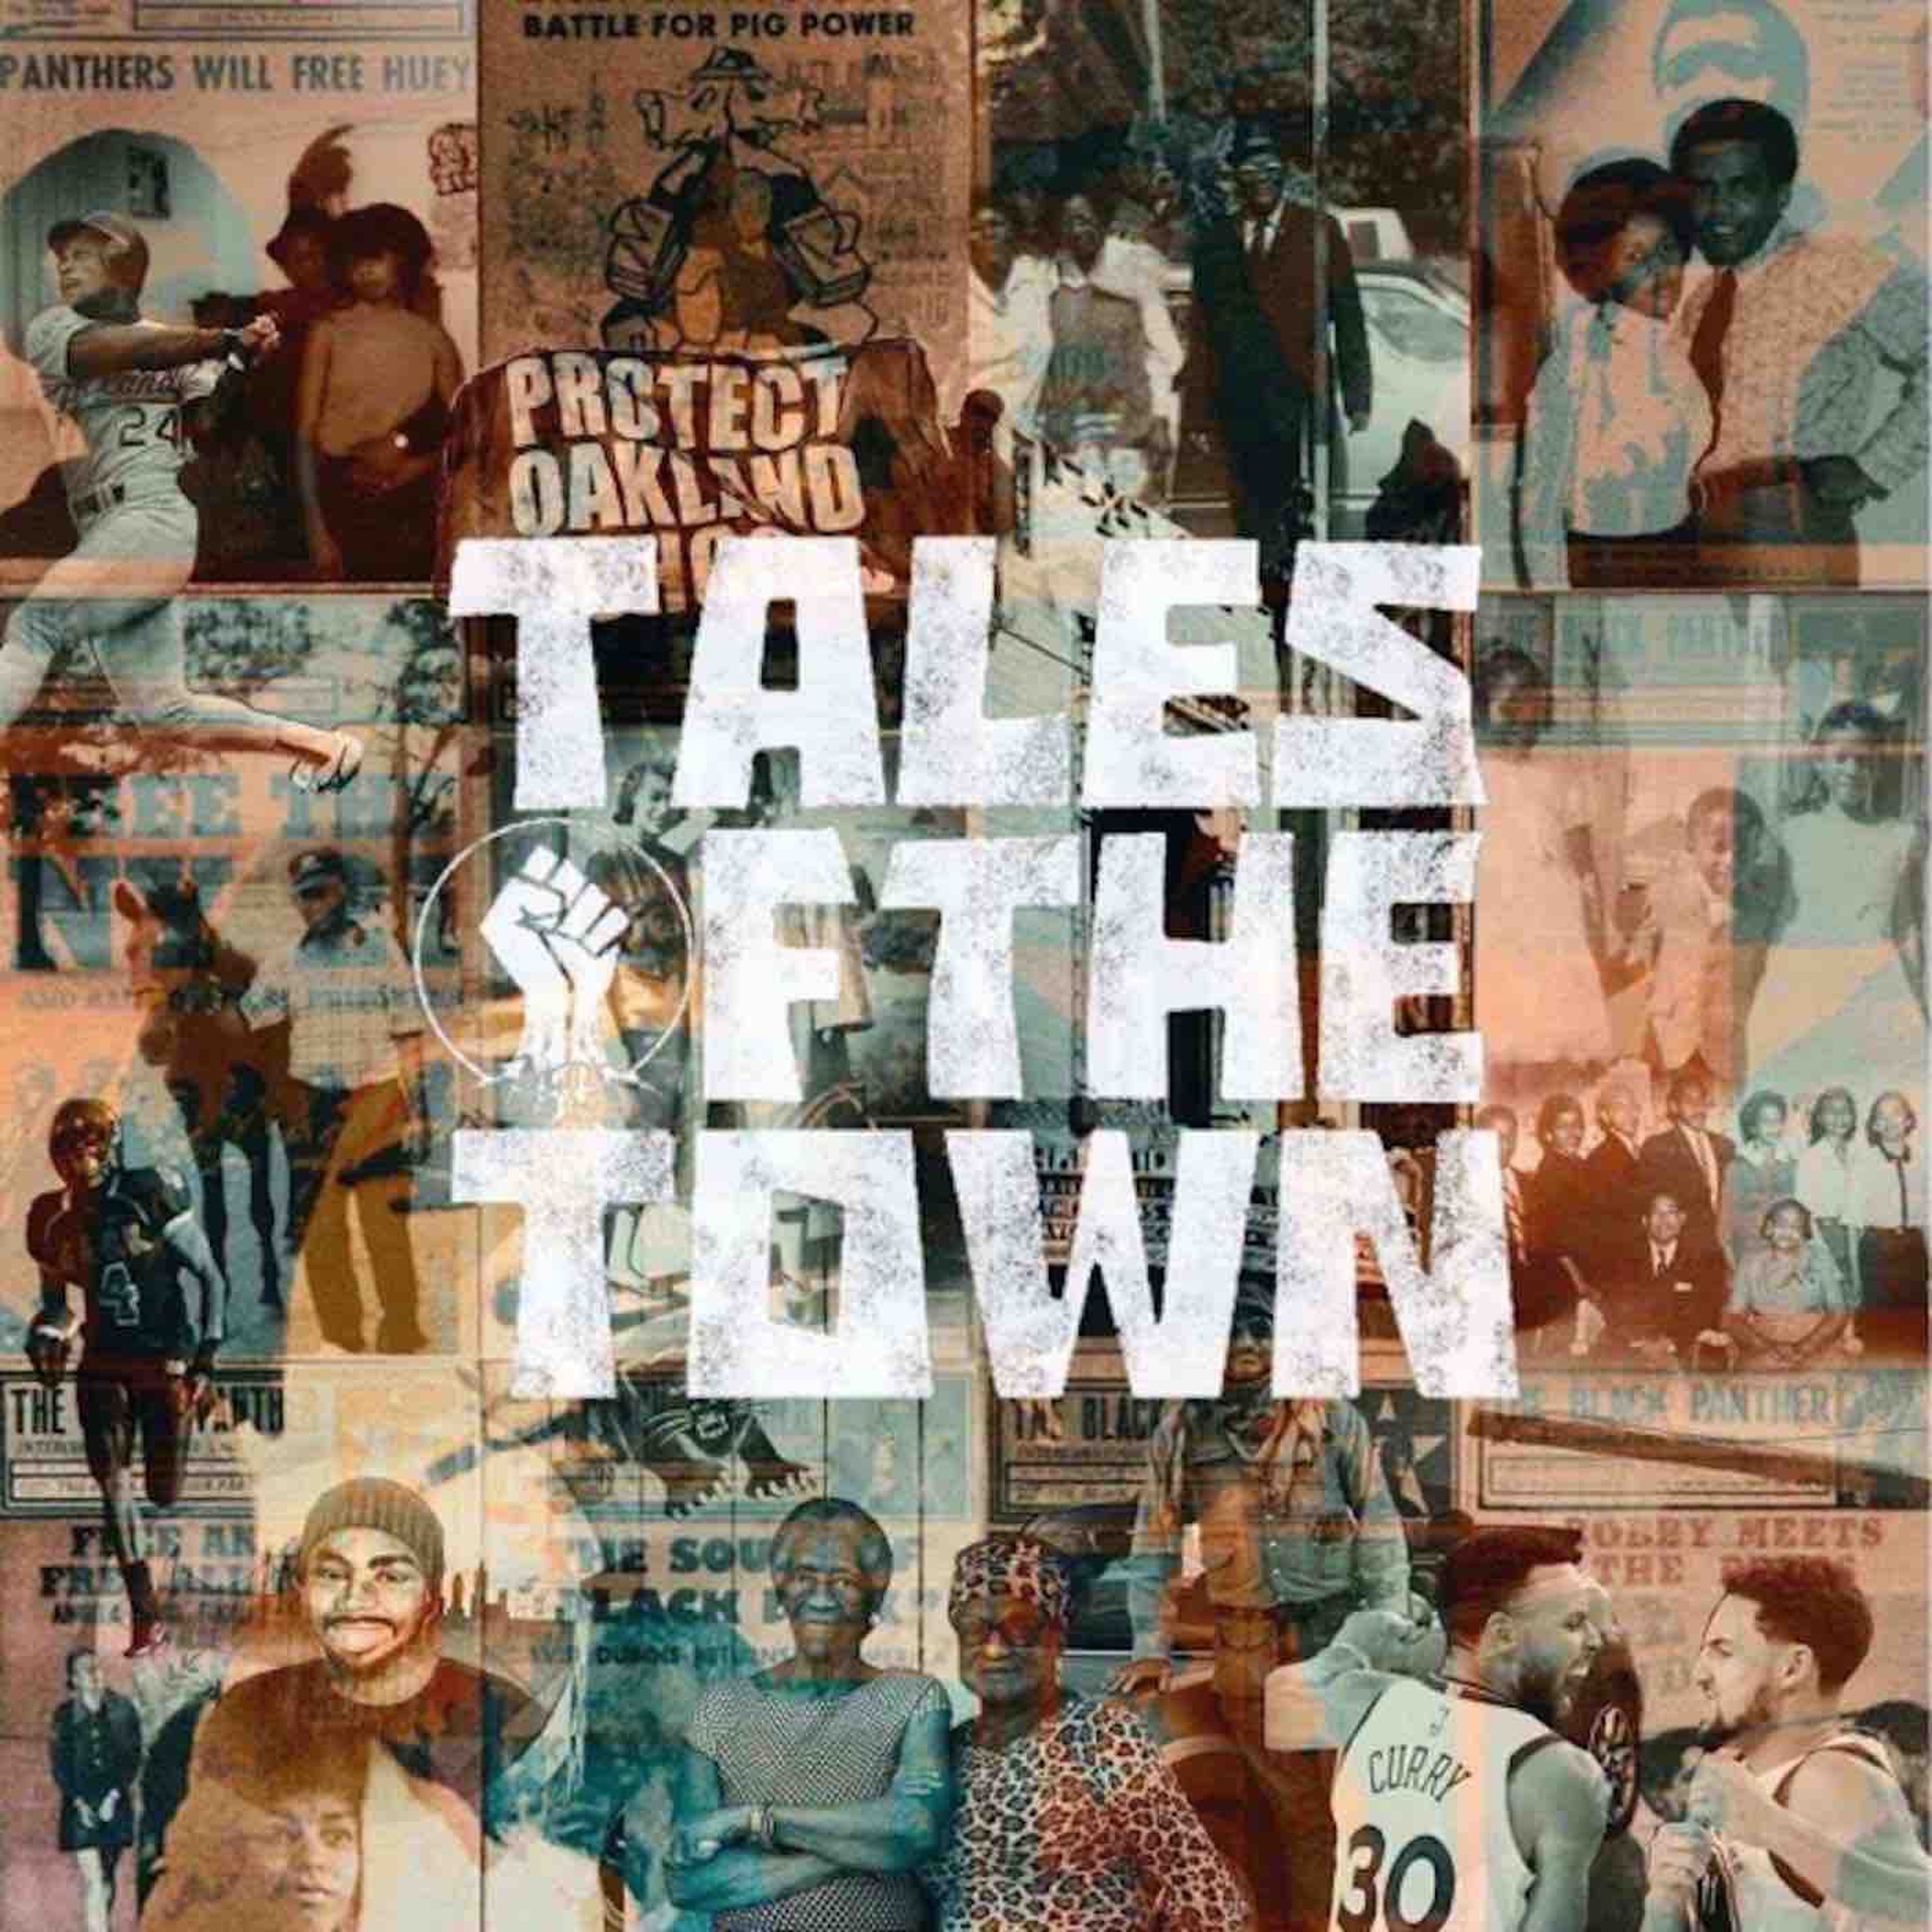 Introducing Tales of the Town, a Podcast about Black Oakland